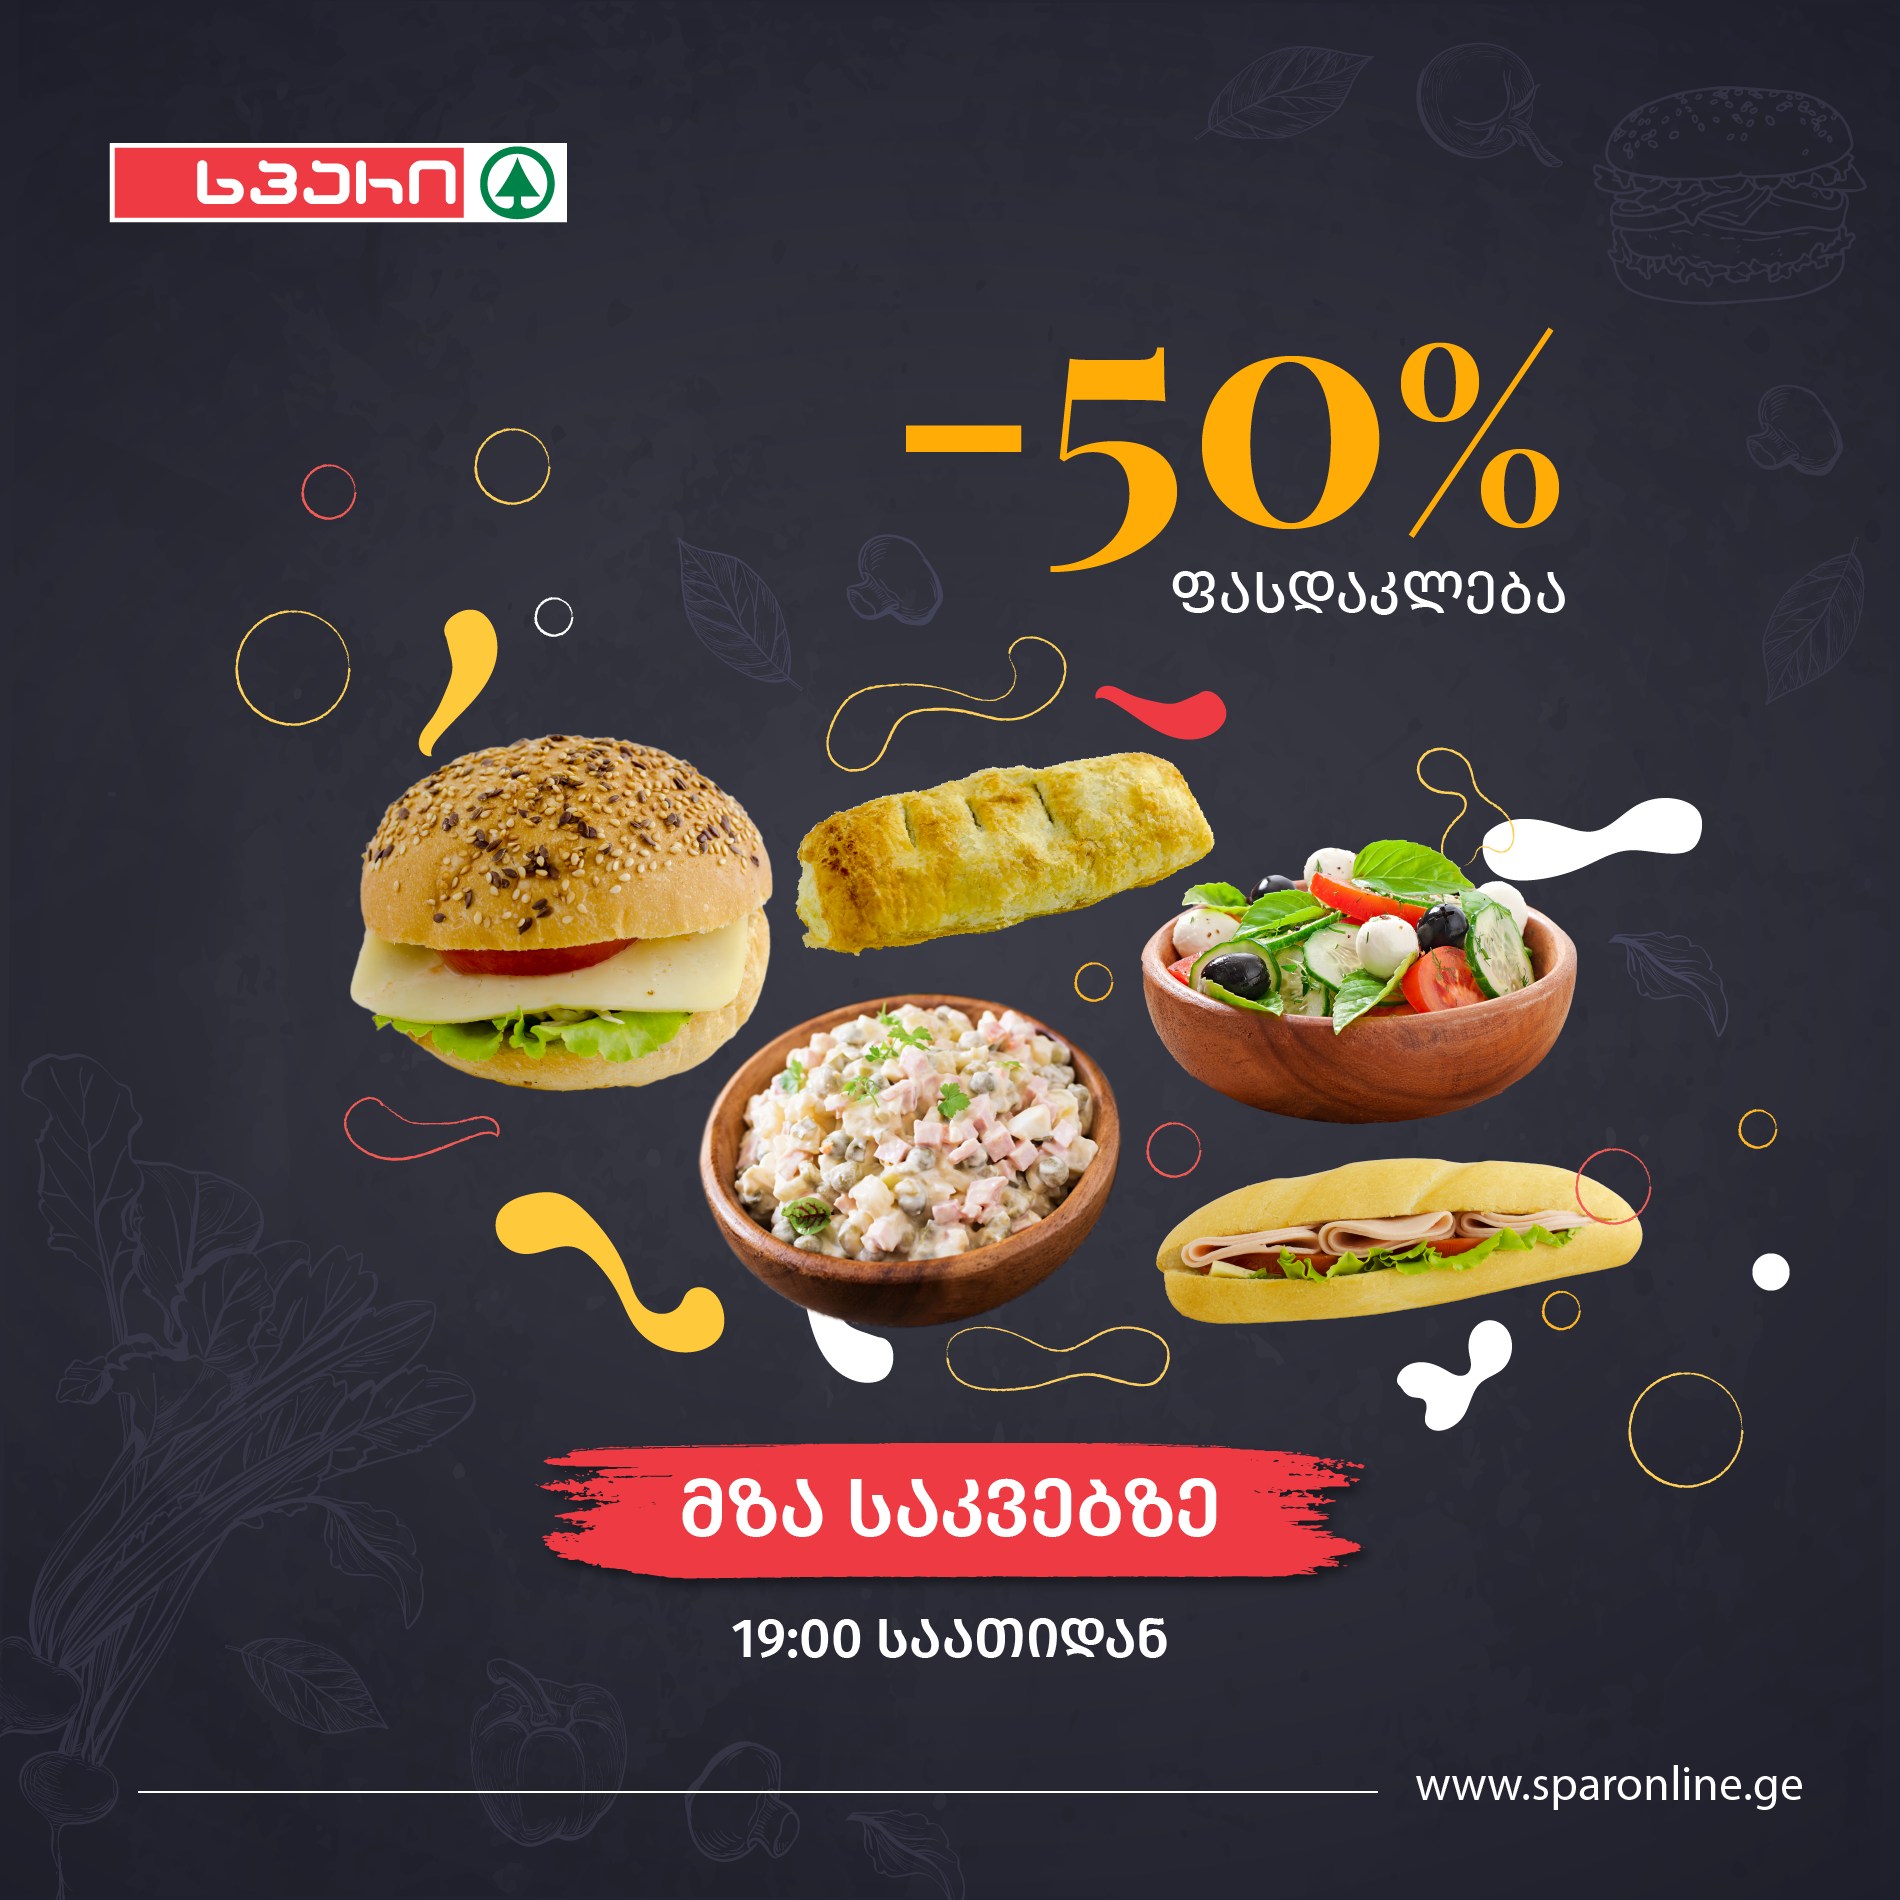 -50% discount on ready meals